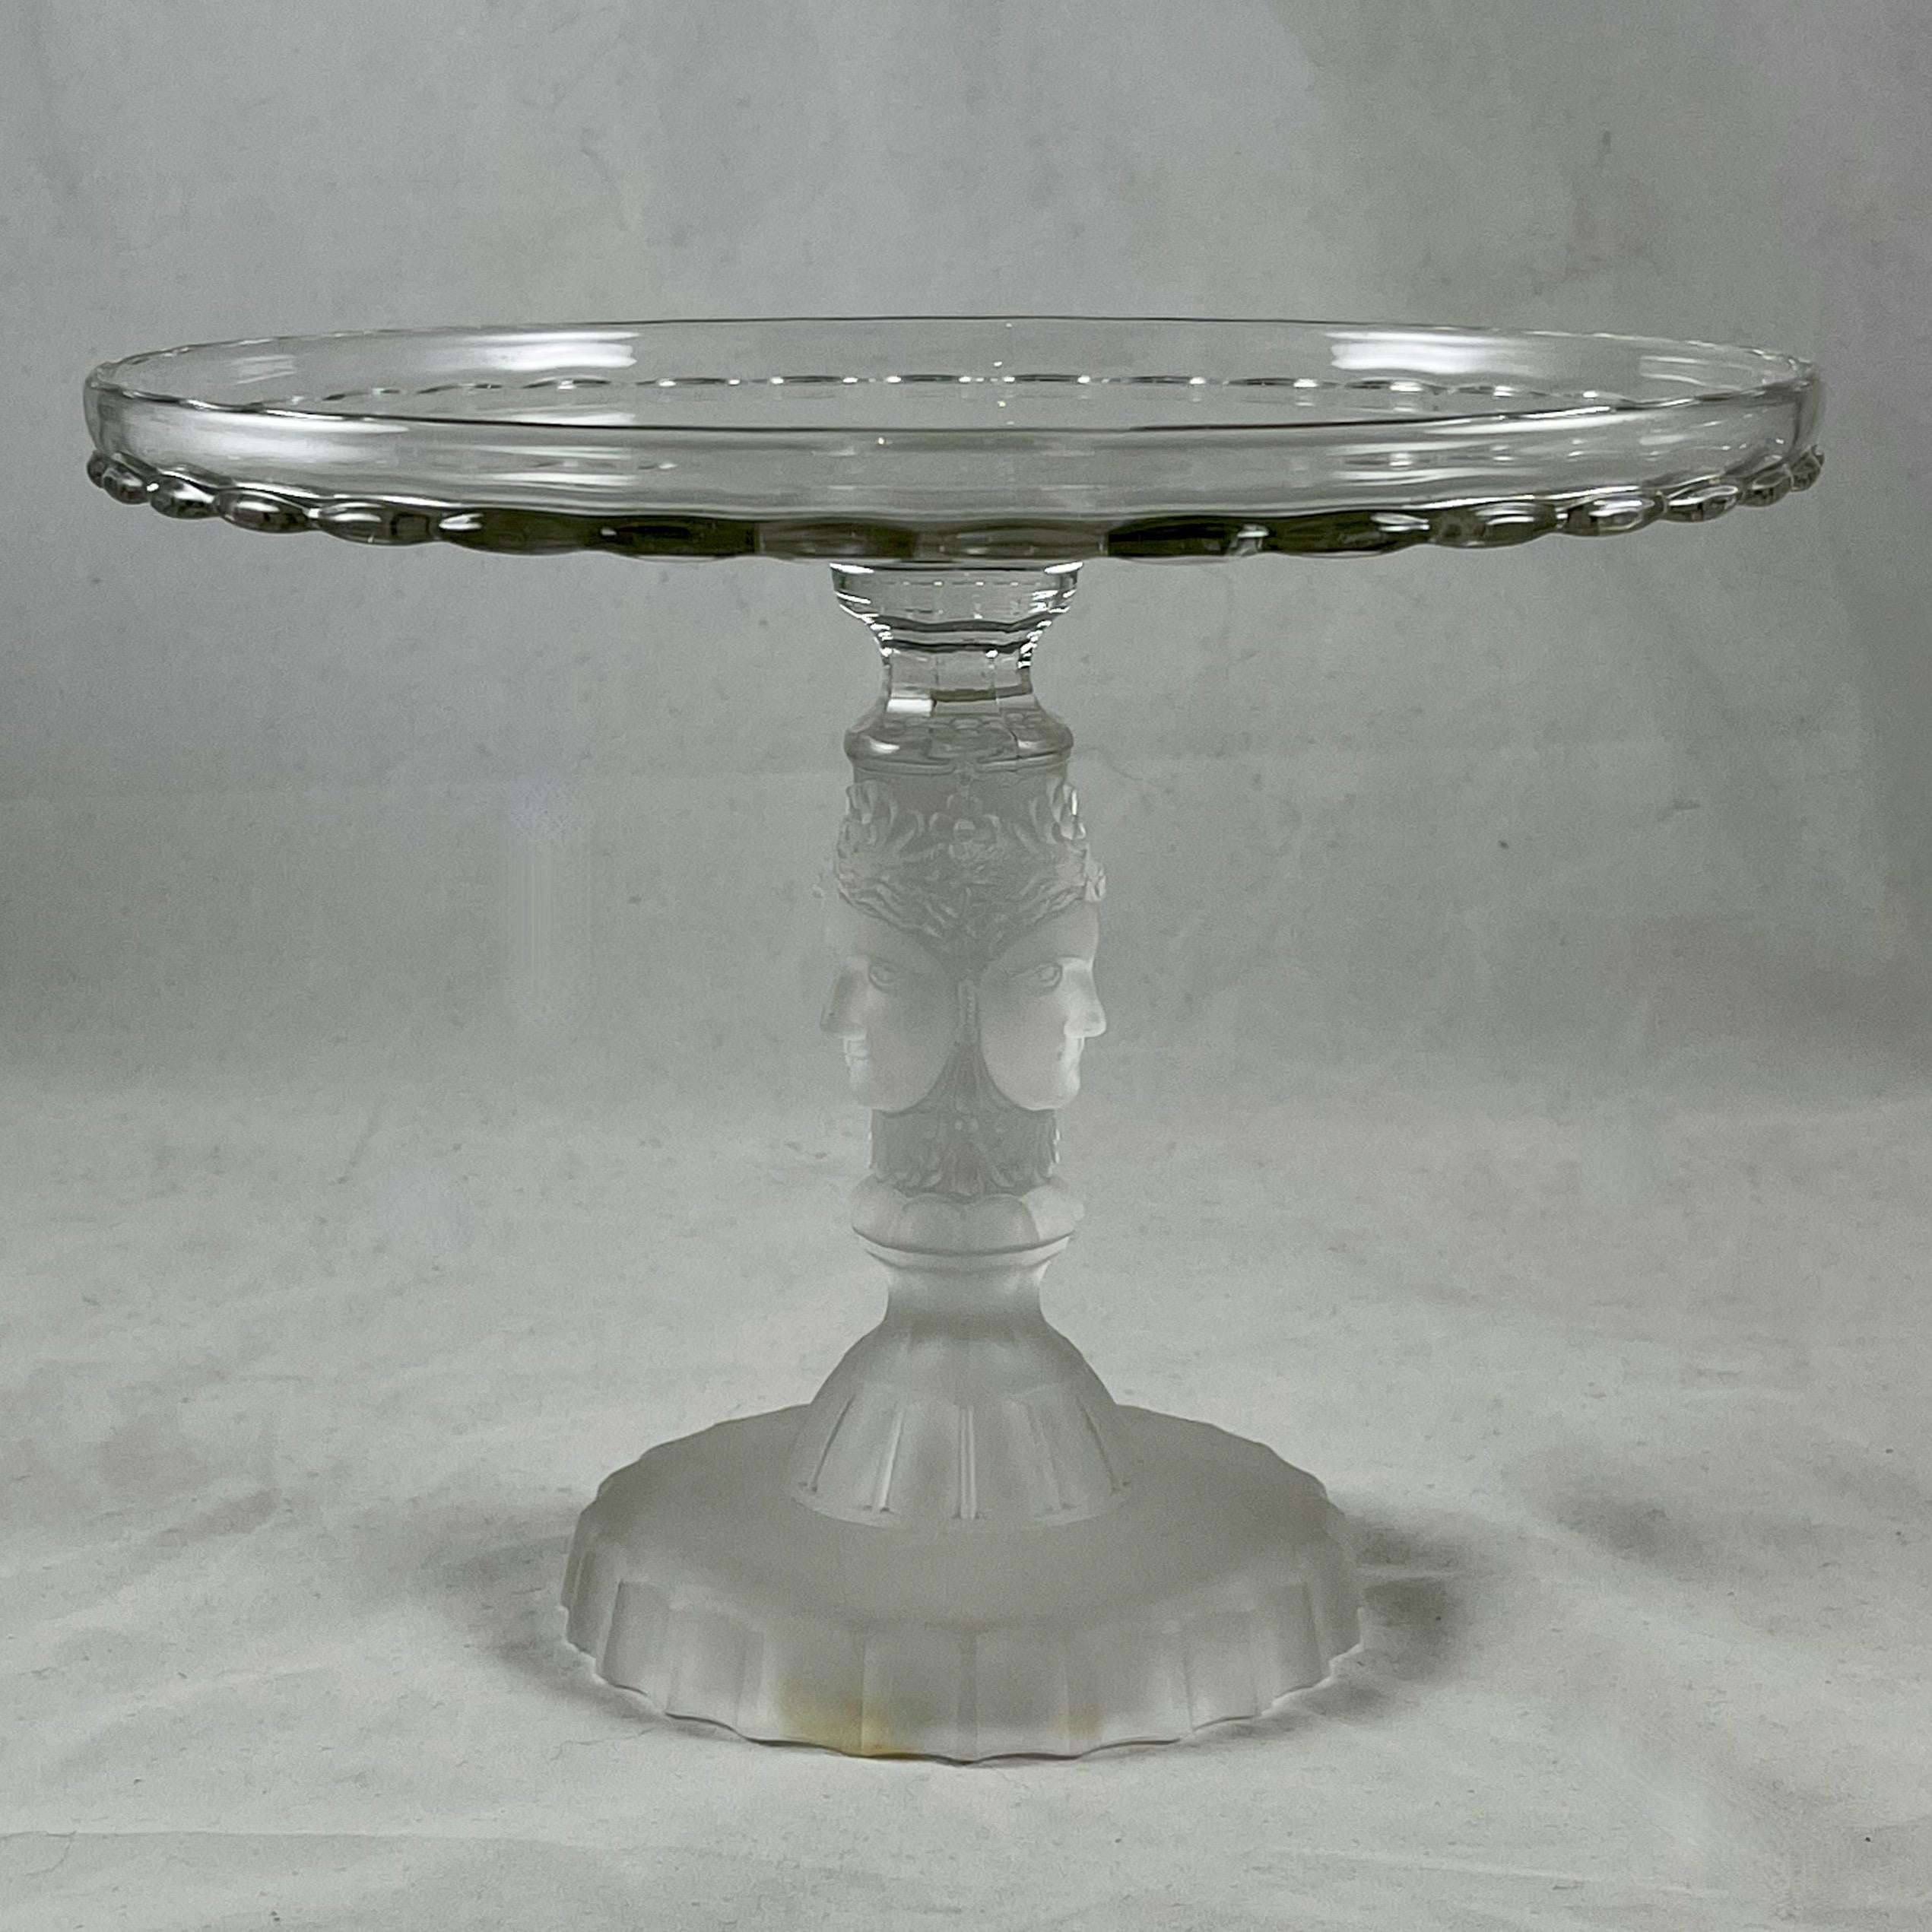 A Three Face early American pressed glass cake stand by Duncan Miller Glass, circa 1880-1890.

The Three Face pattern was designed by J. E. Miller, his most well known design inspired by the profile of his wife Elizabeth Bair Miller. The original